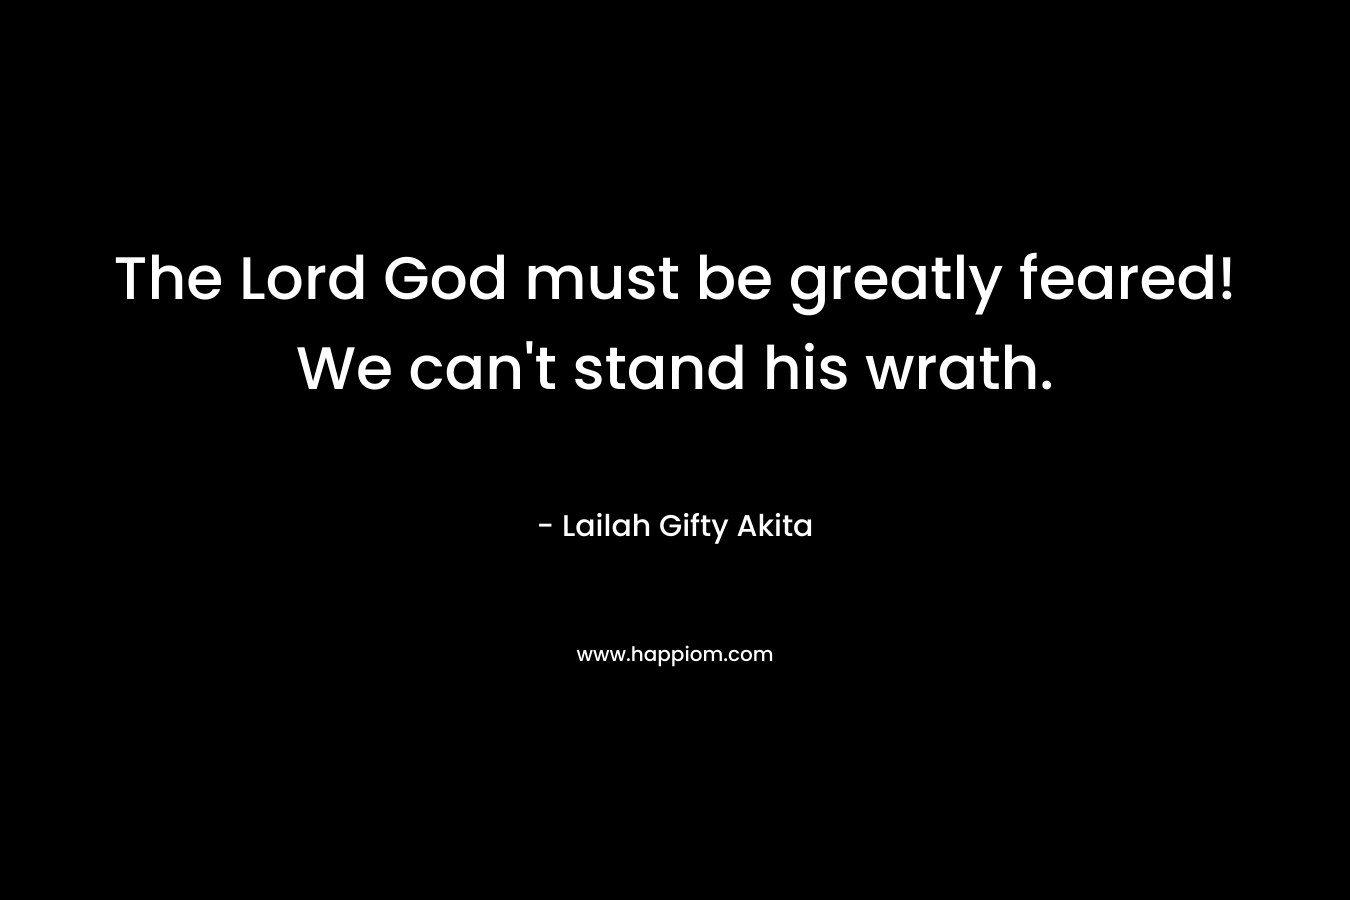 The Lord God must be greatly feared! We can’t stand his wrath. – Lailah Gifty Akita